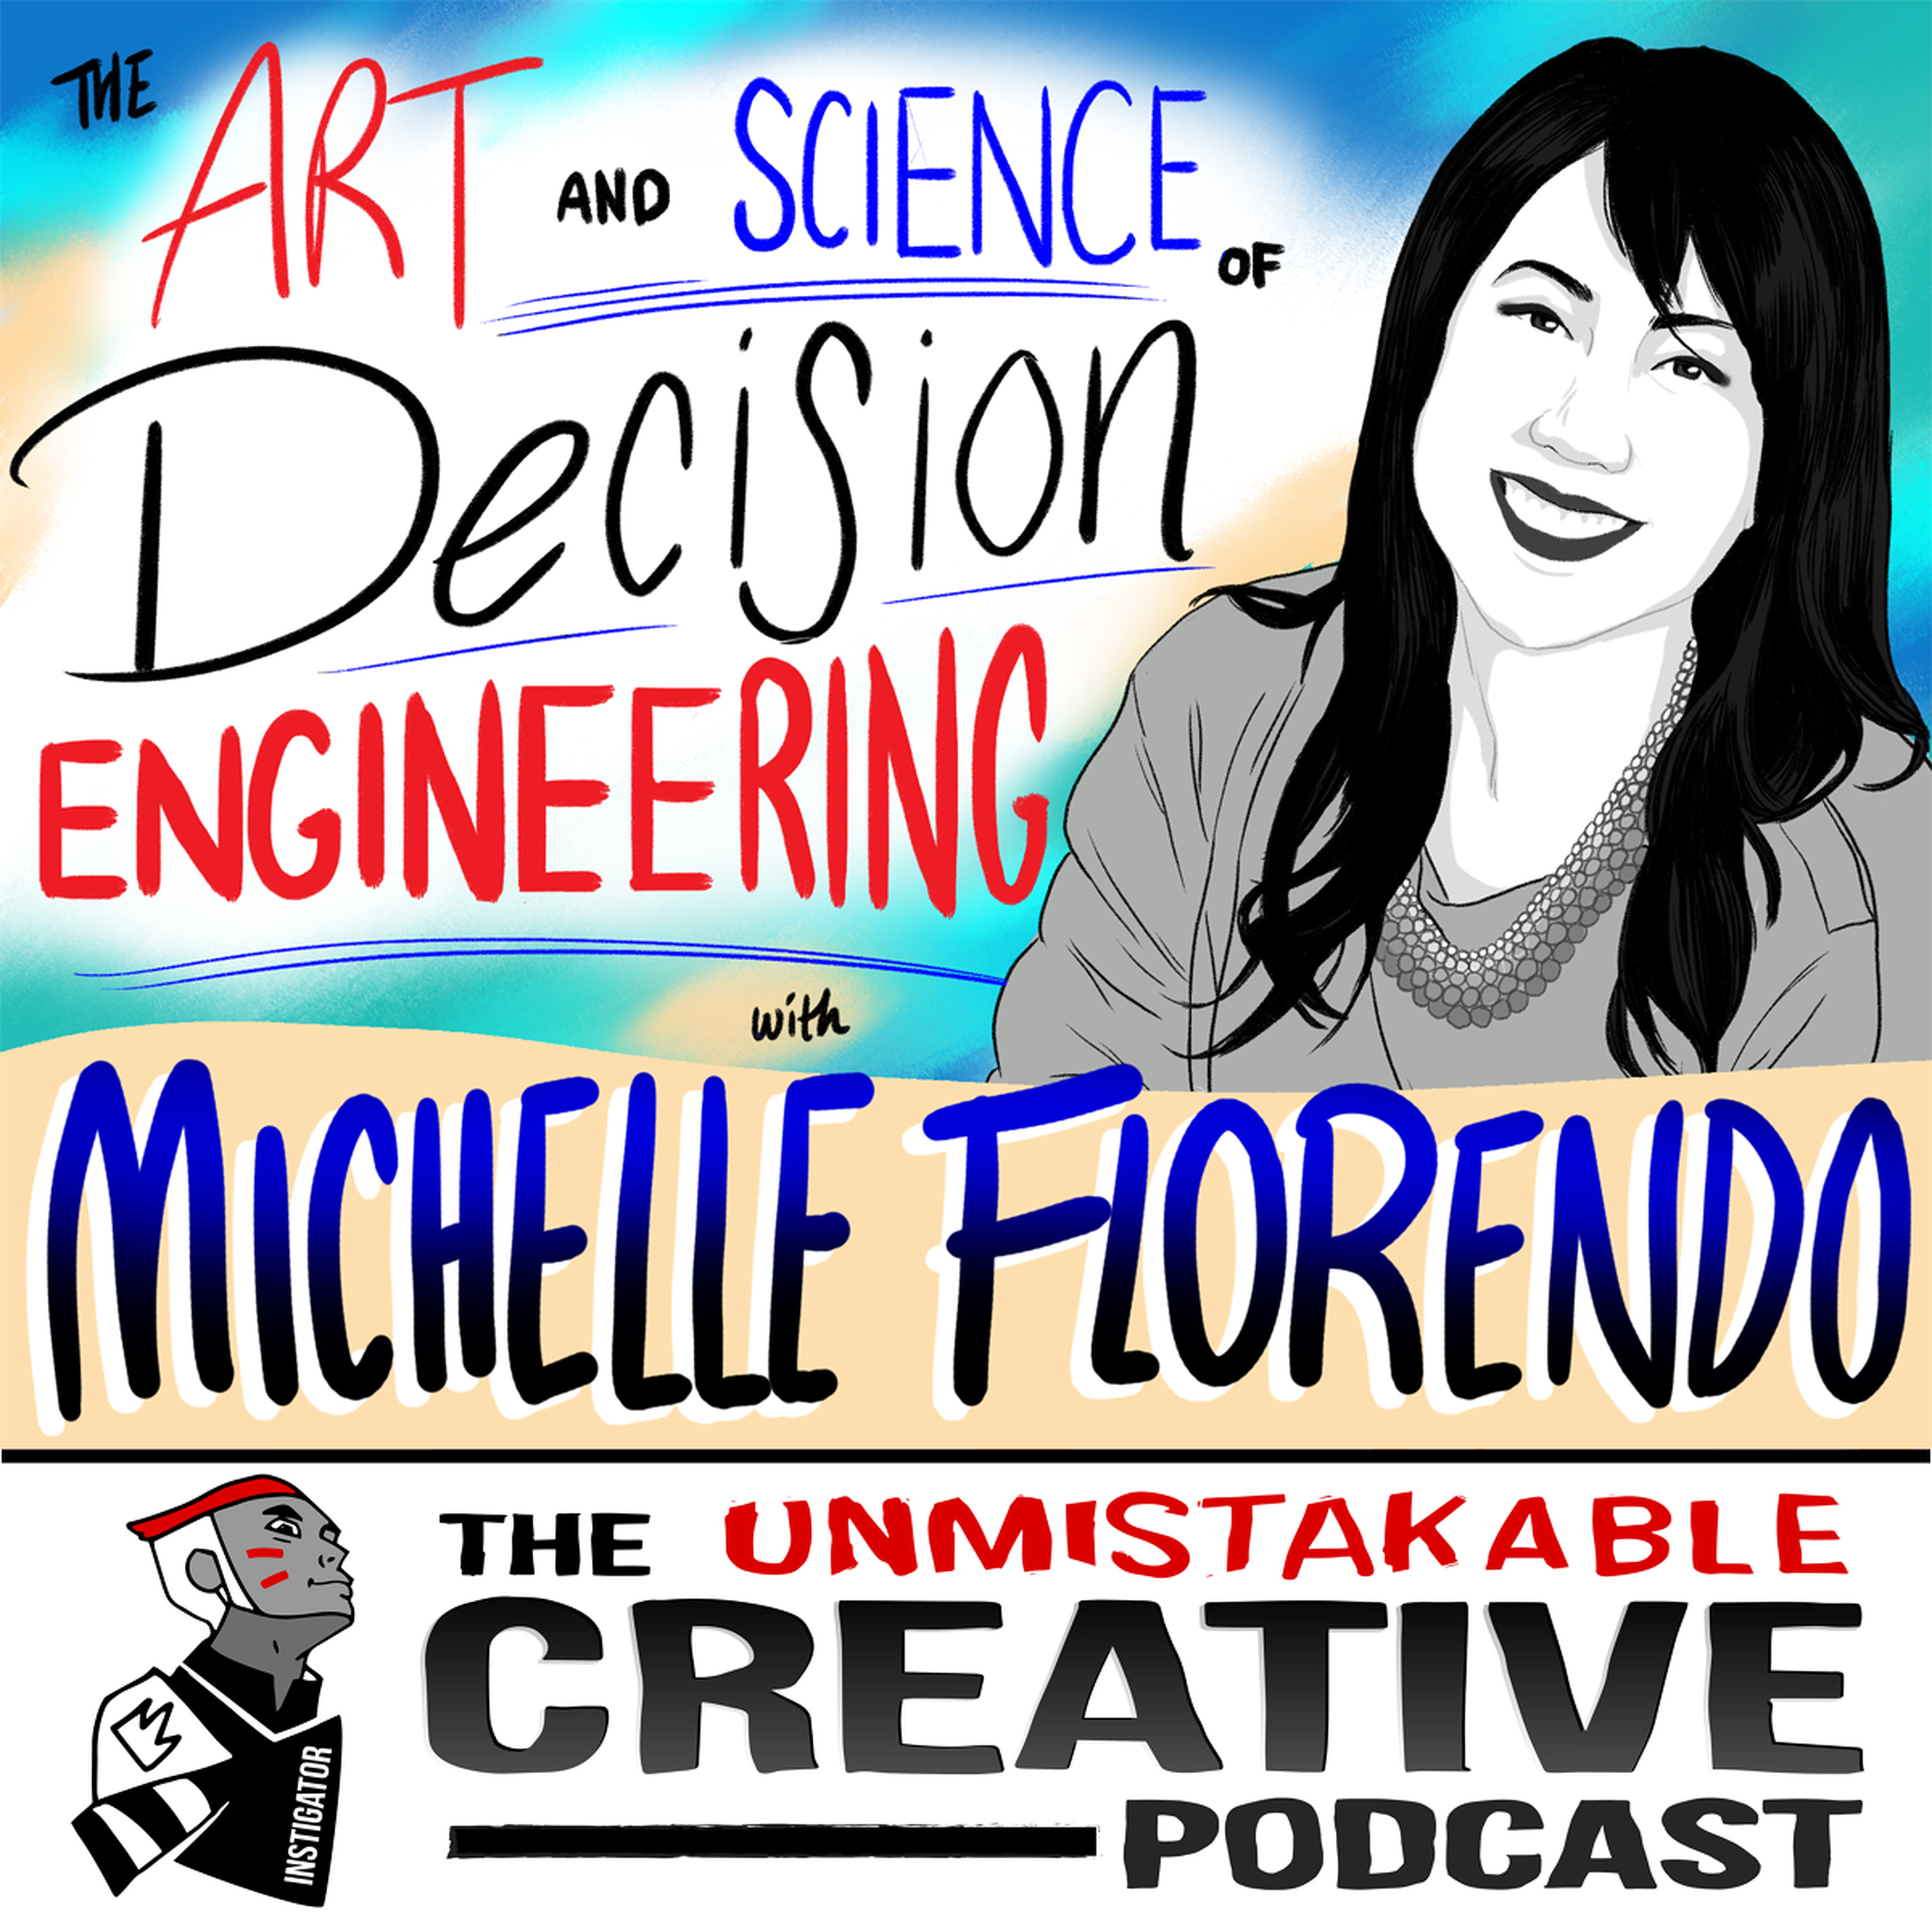 The Art and Science of Decision Engineering with Michelle Florendo Image